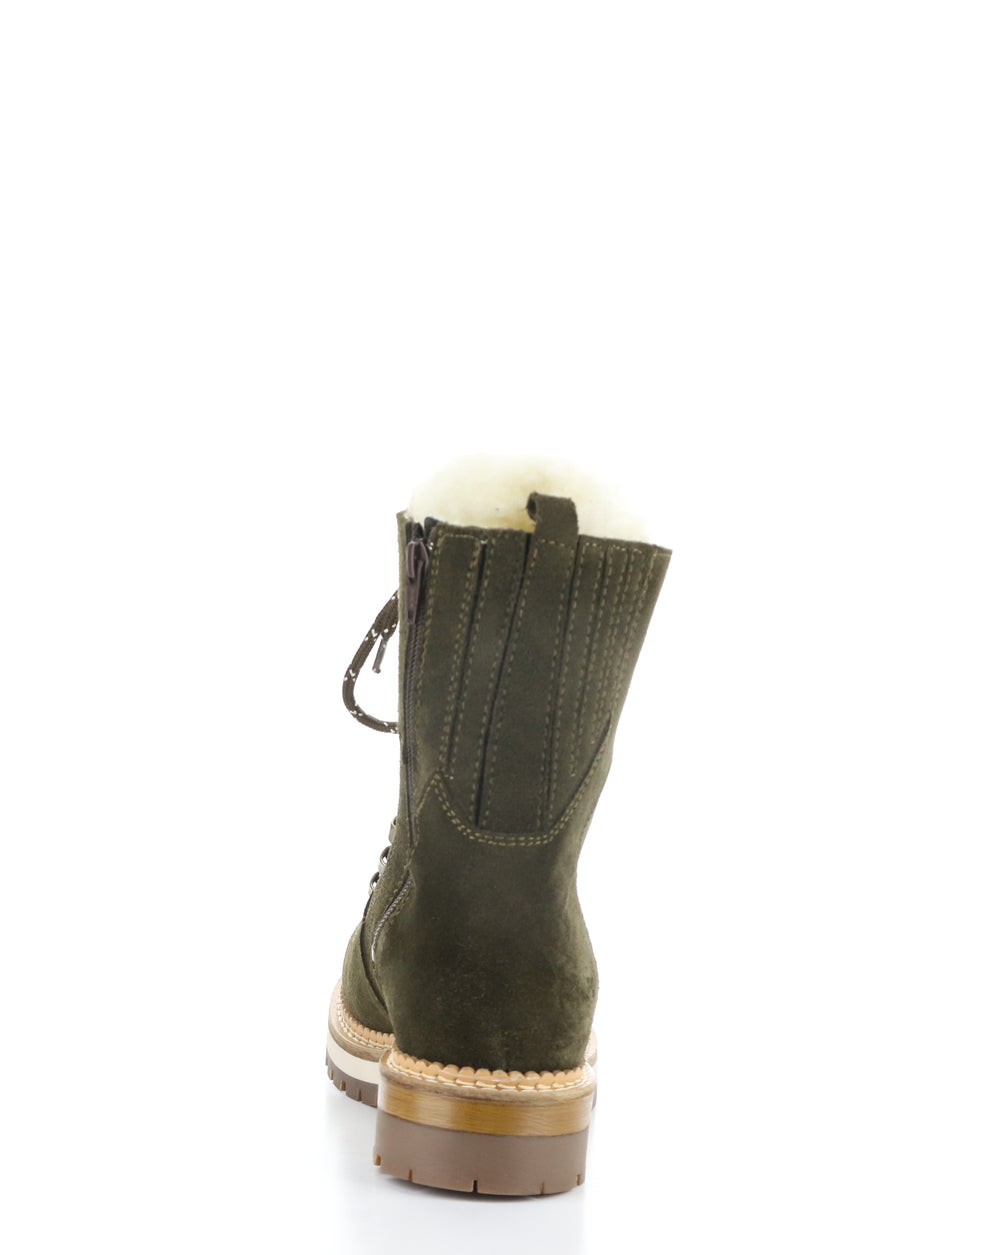 ADA OLIVE Round Toe Boots